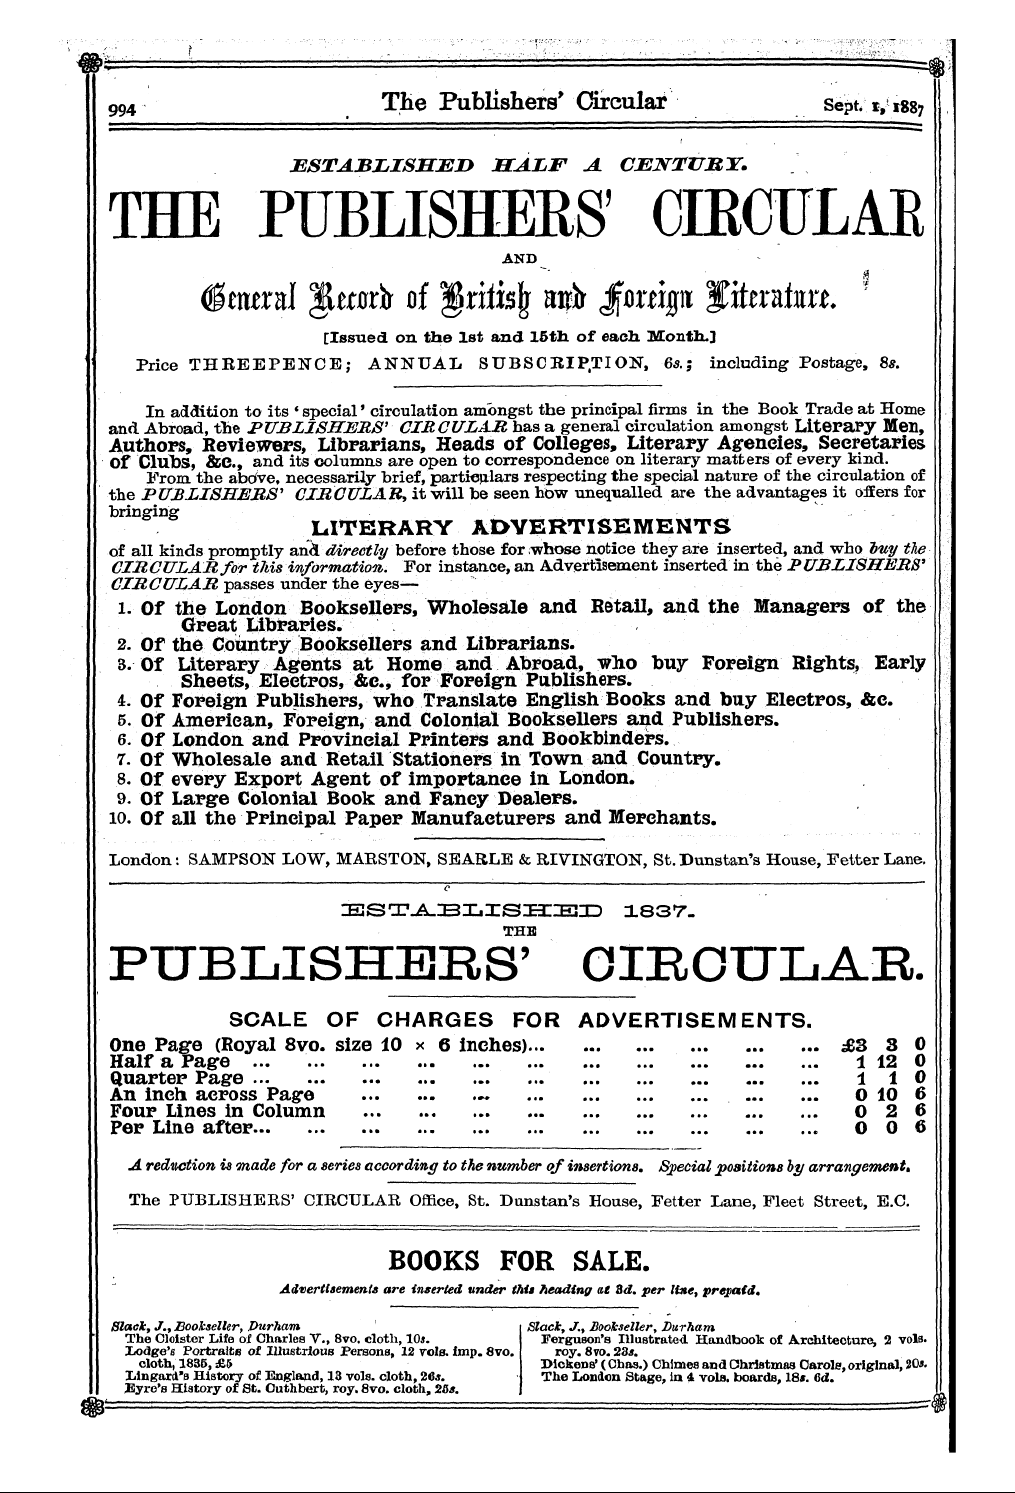 Publishers’ Circular (1880-1890): jS F Y, 1st edition - Books For Sale. Advertisements Are Inserted Under This Heading At 3d. Per Line, Prepaid.